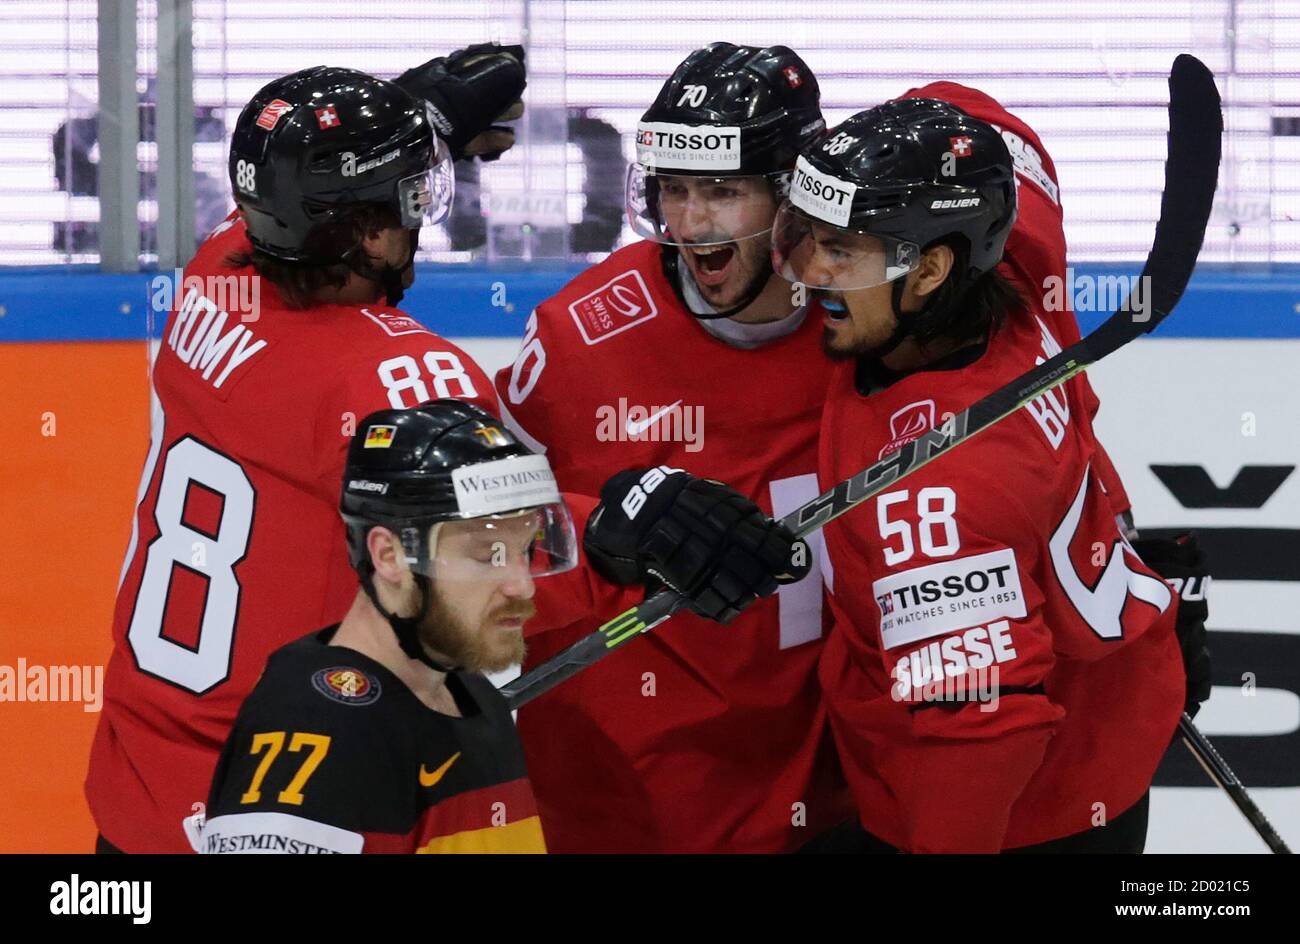 Switzerland's Denis Hollenstein (C) celebrates with teammates Kevin Romy  (L) and Eric Blum (R) after scoring against Germany during their Ice Hockey  World Championship game at the O2 arena in Prague, Czech